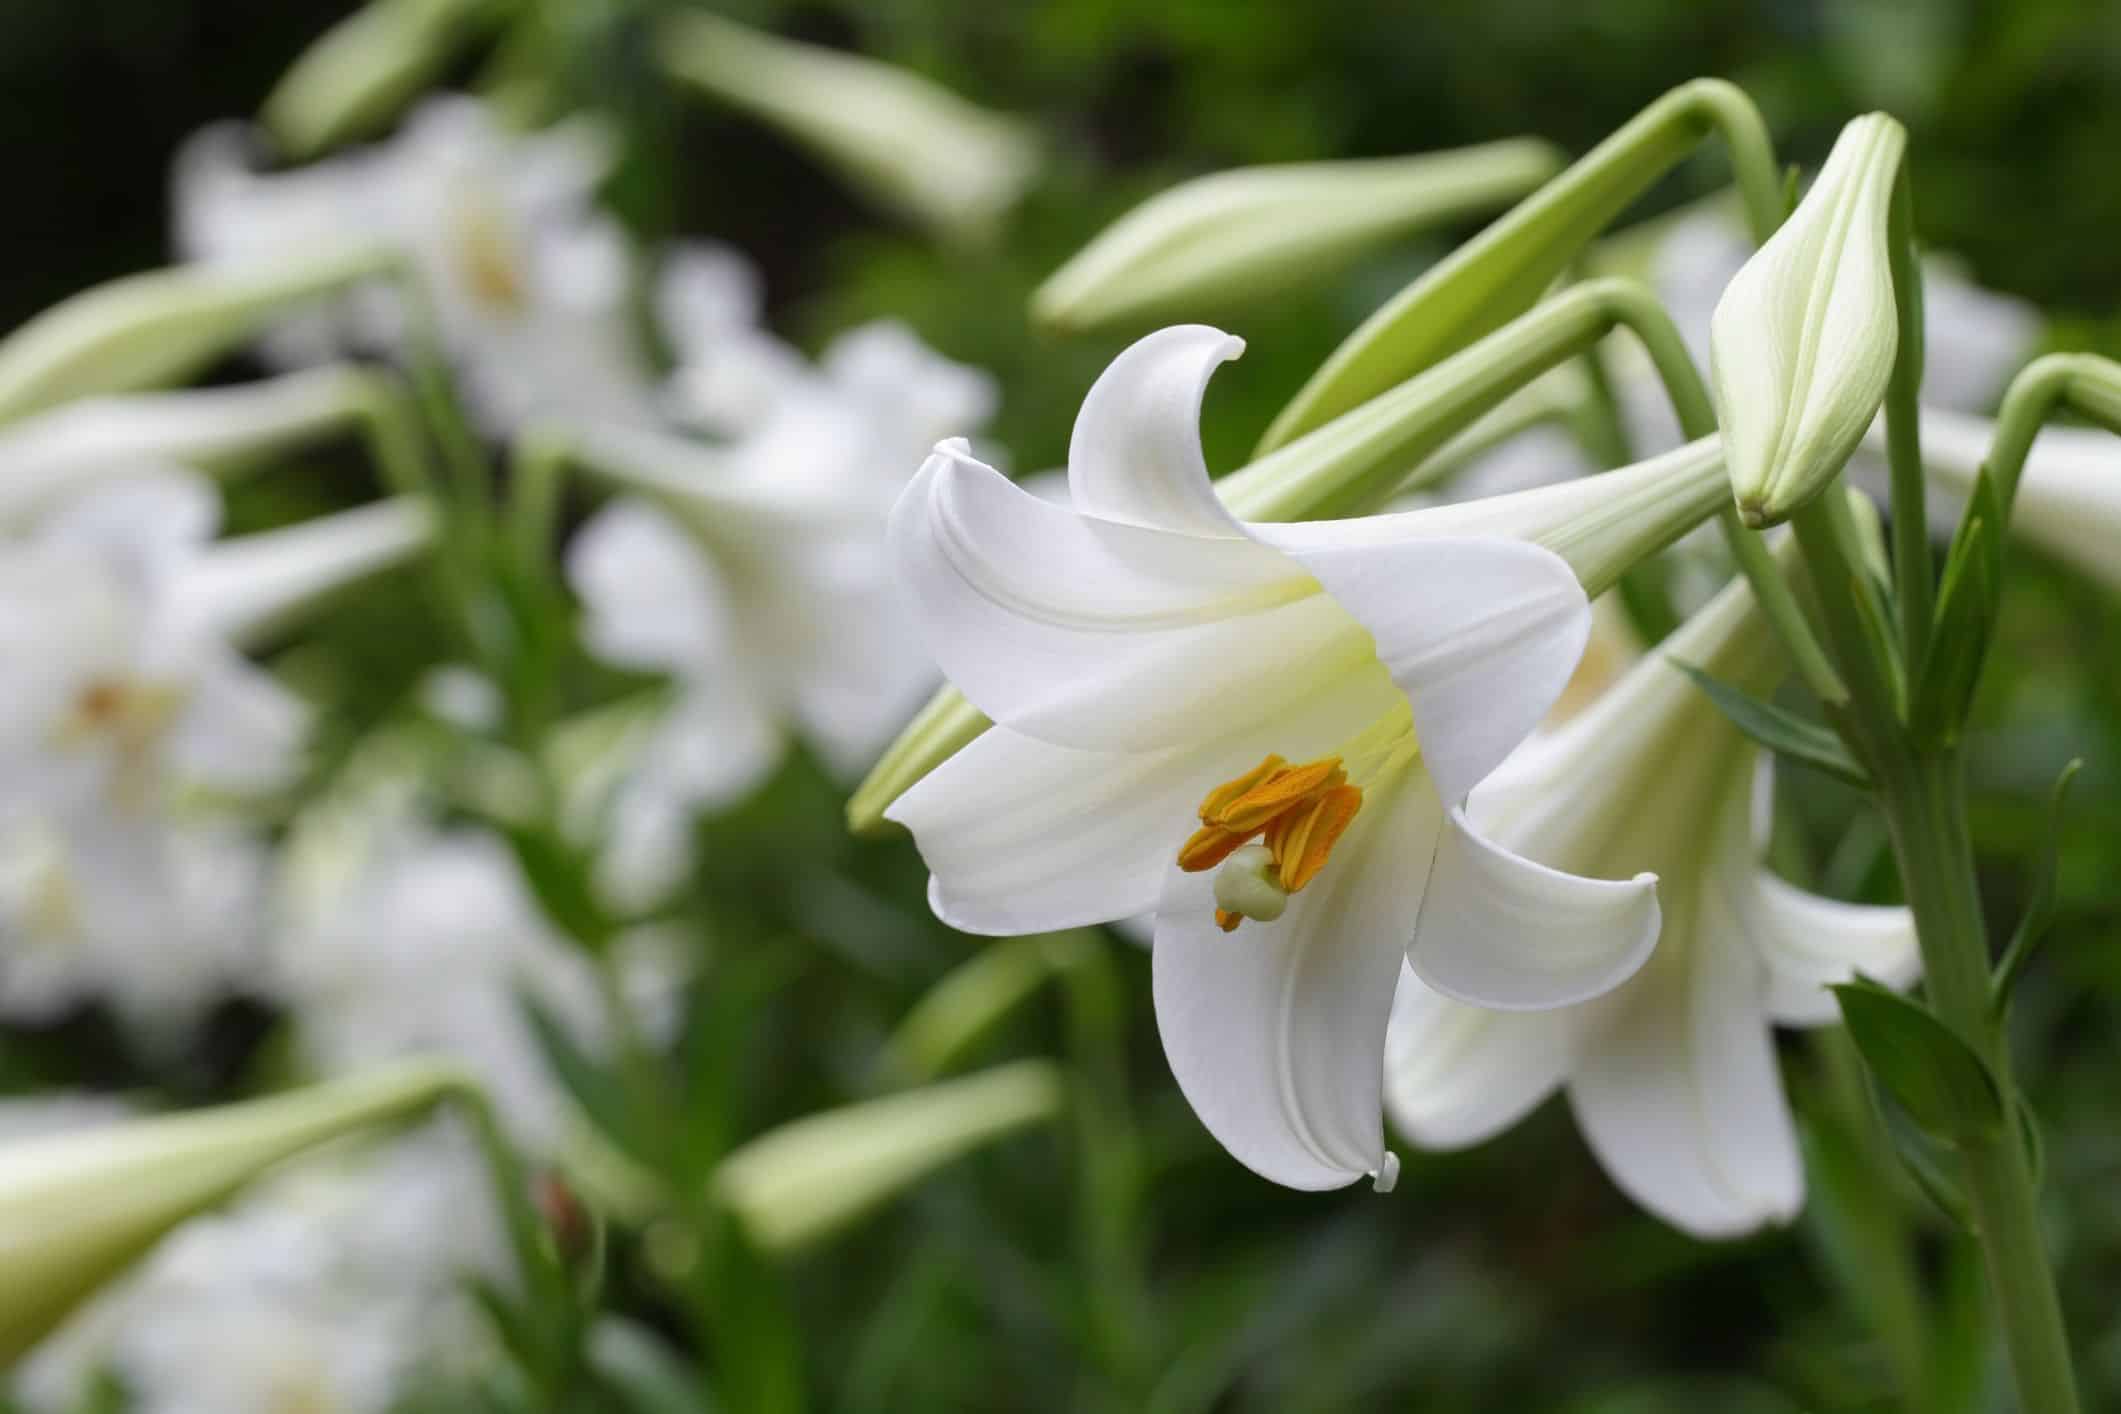 Lilies: the most exquisite garden flowers for summer, winter & spring, with vibrant images.